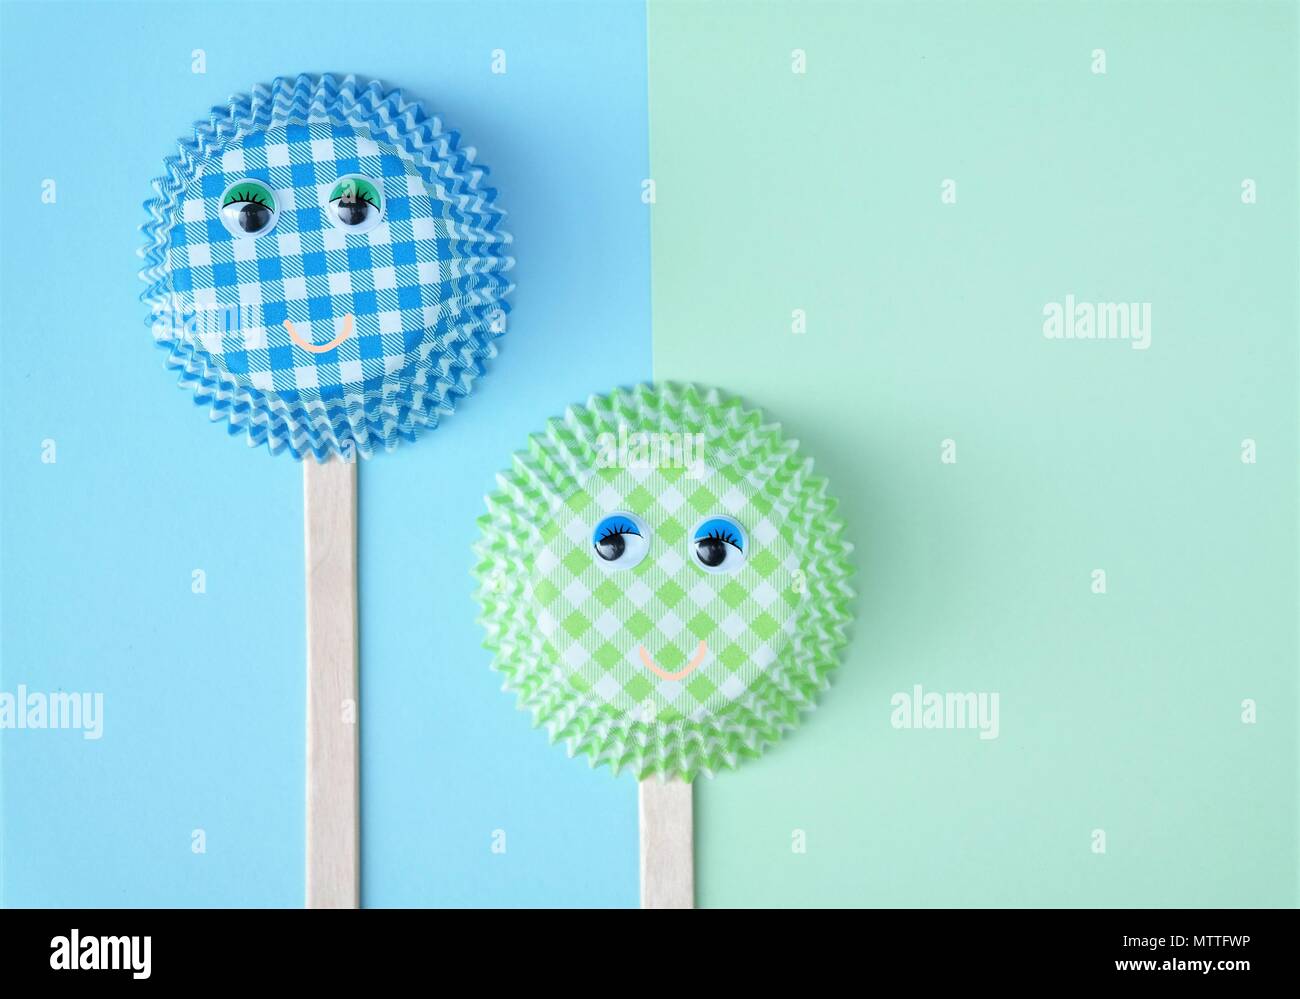 two cupcake molds with wobbly eyes, ice popsicle sticks en smiling faces. simple baking concept in green and blue colors. Funny creative image Stock Photo